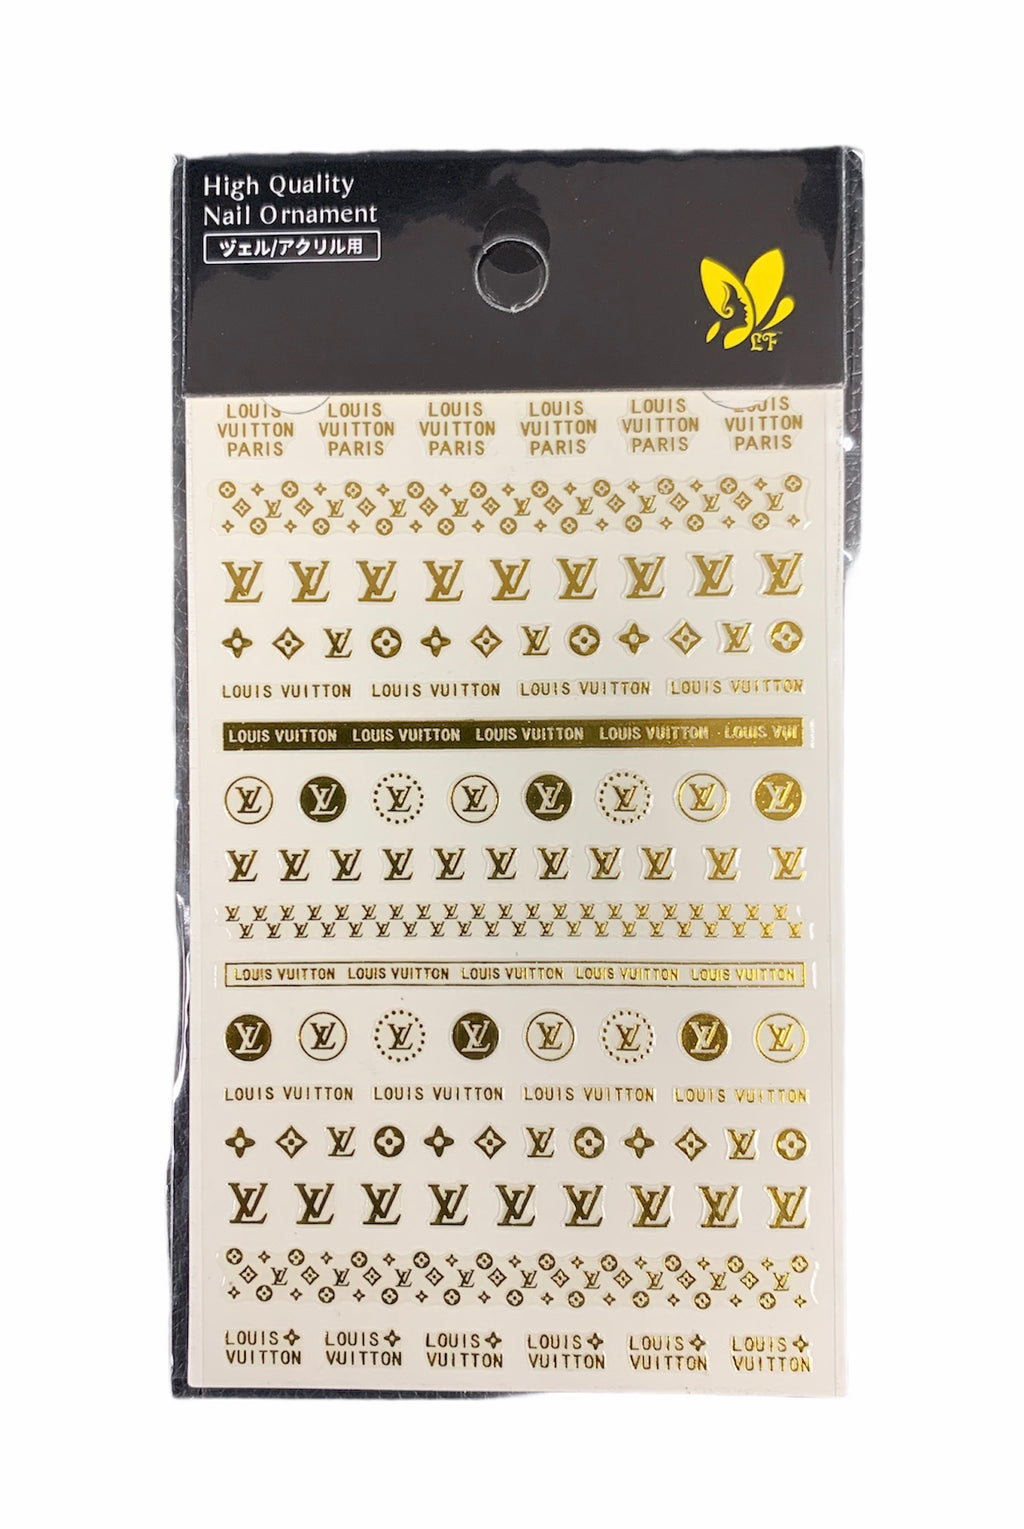 DSN Nail Sticker 9604 – Global Beauty Supply